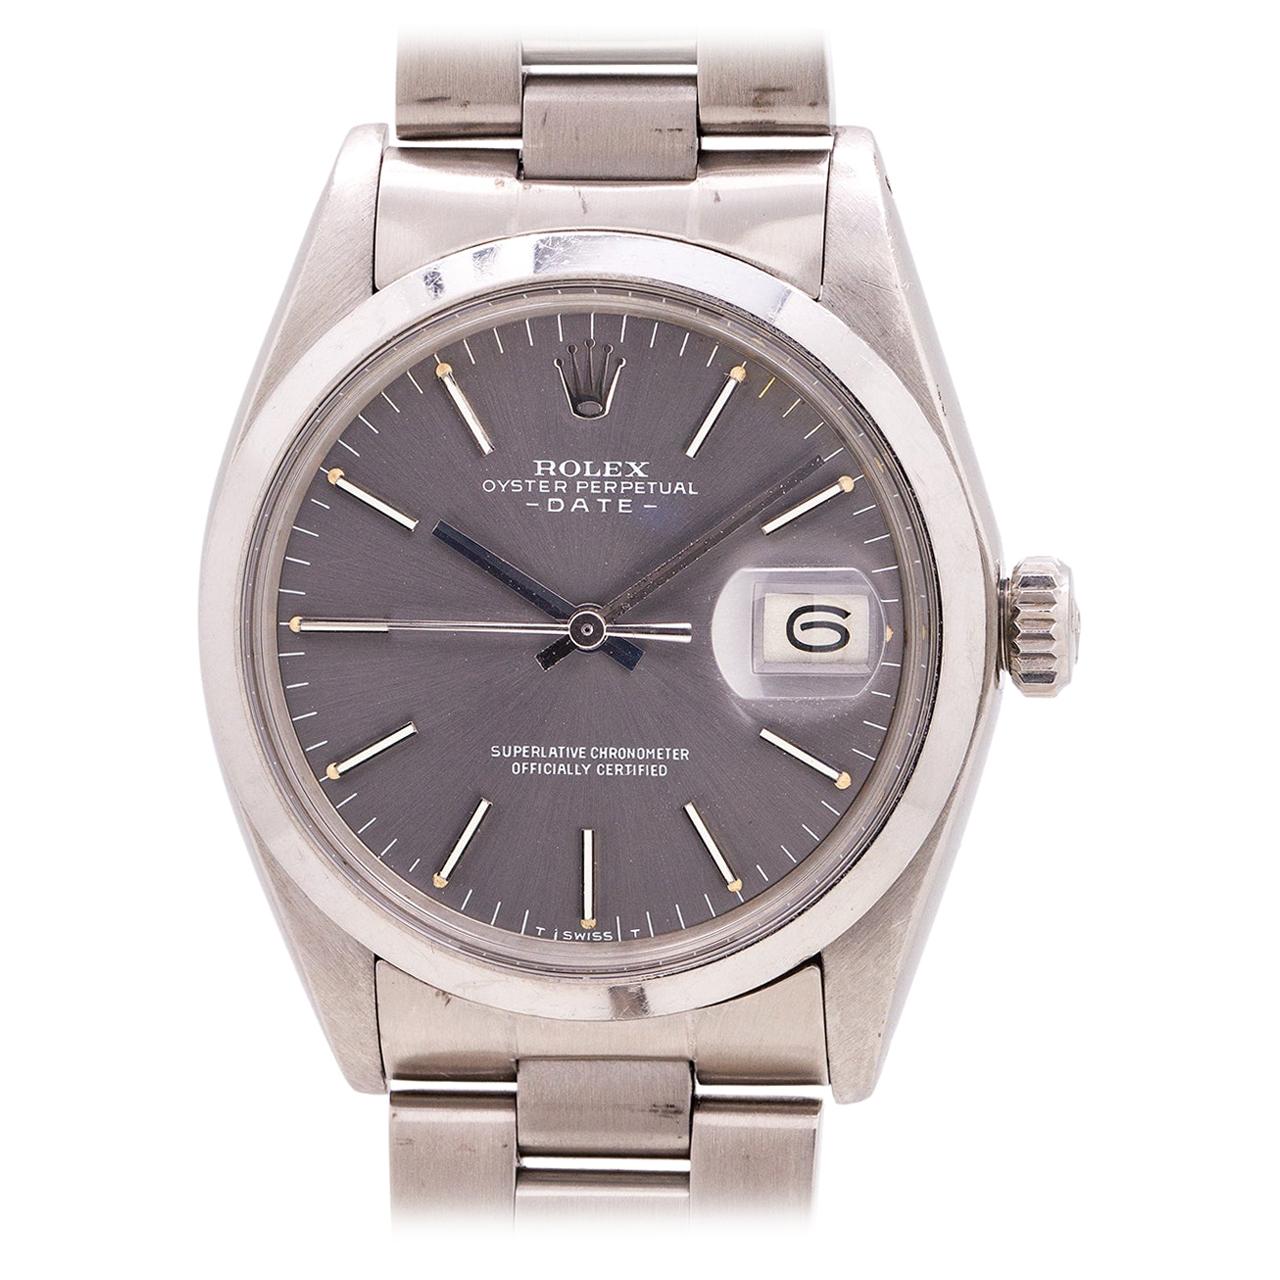 Rolex Oyster Perpetual Date Ref 1500 Stainless Steel Watch Gray Dial, circa 1972 For Sale